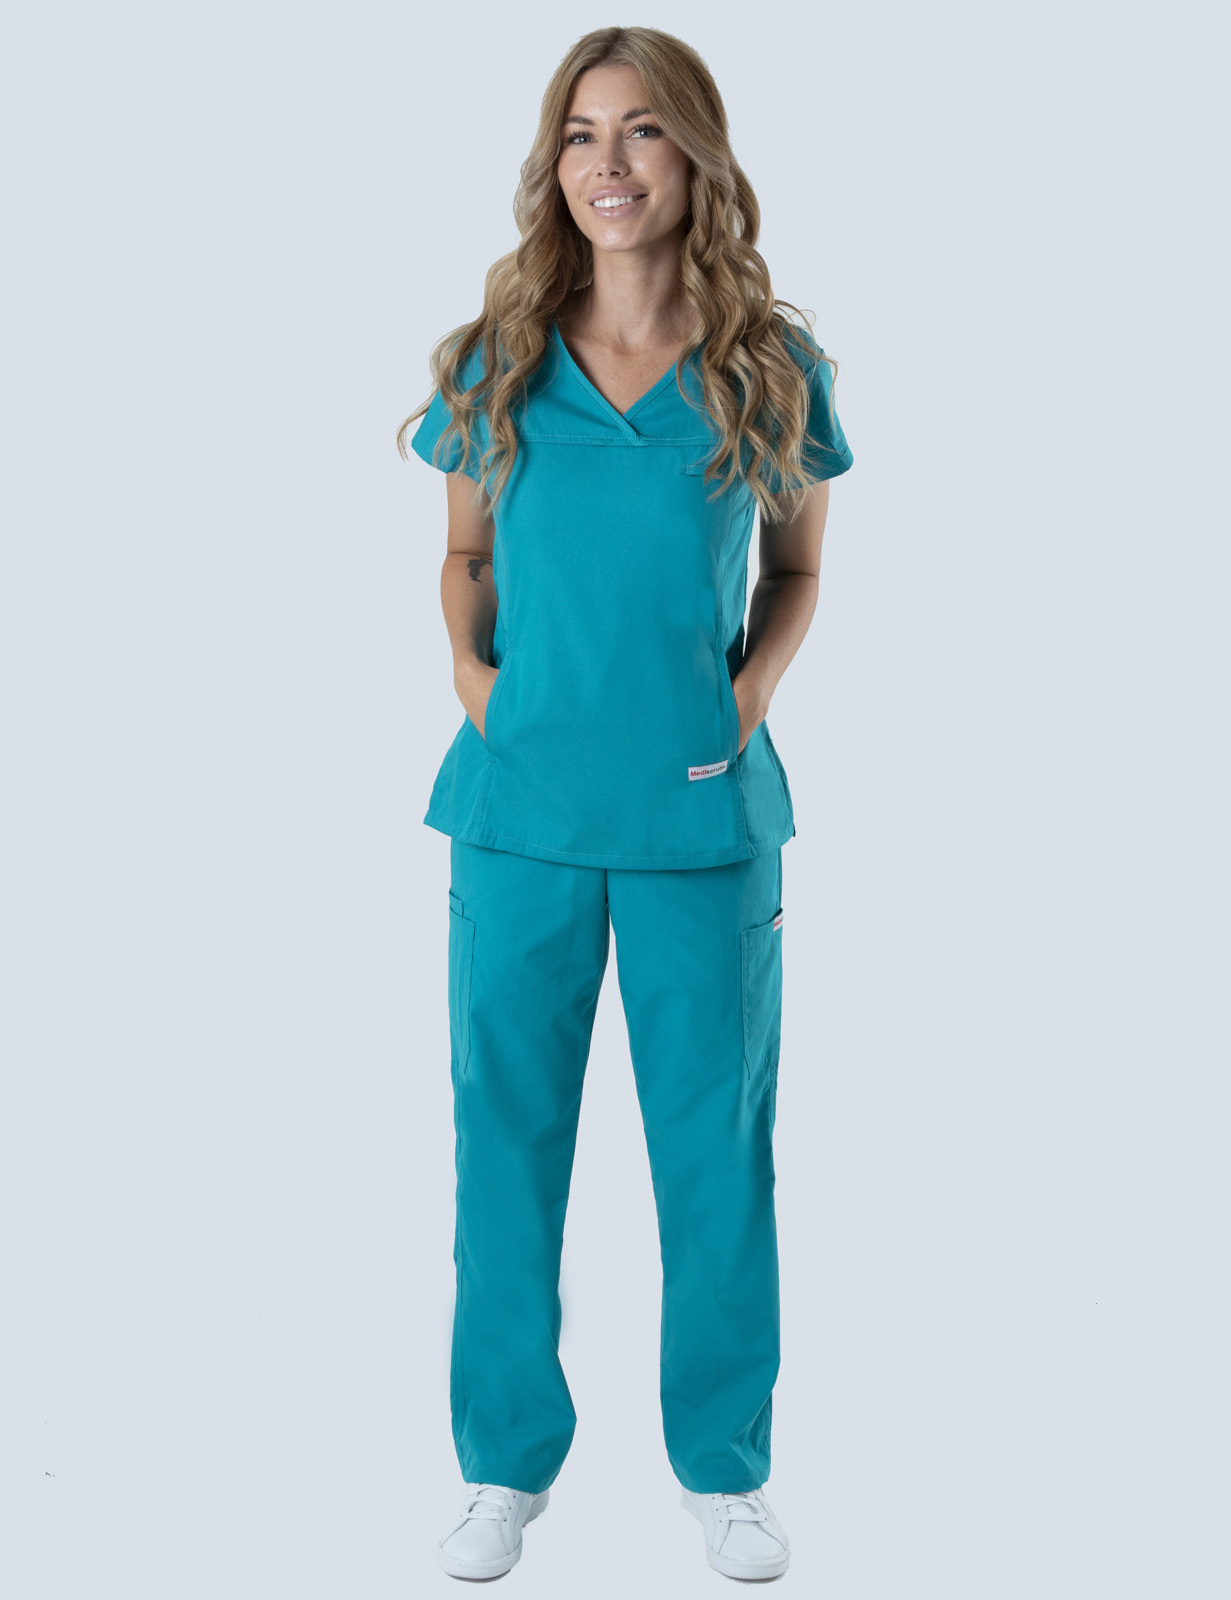 Women's Fit Solid Scrub Top - Teal - XX Small